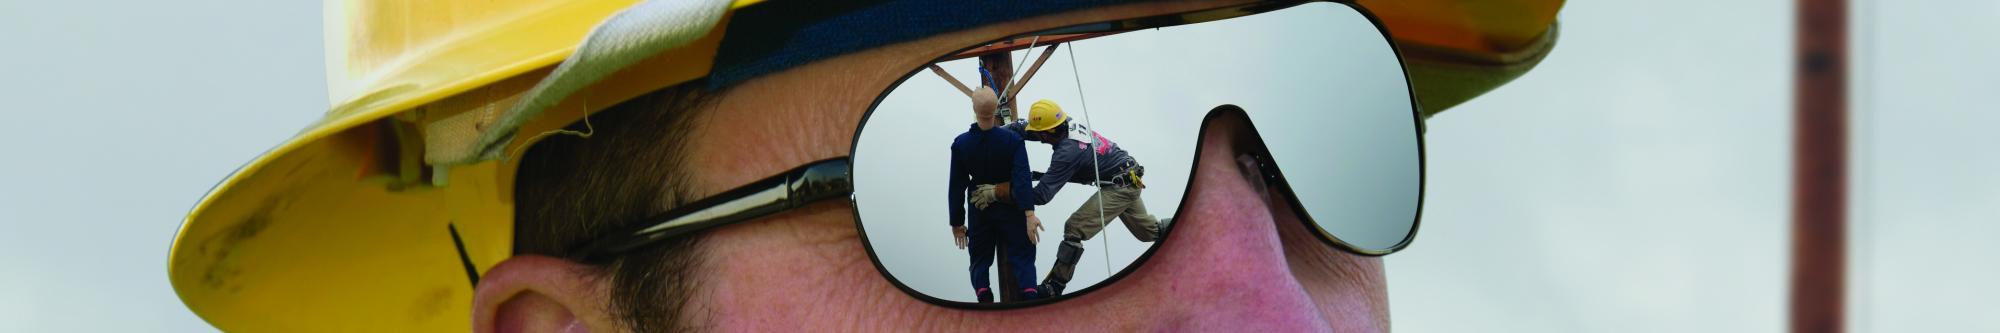 Worker with Goggles